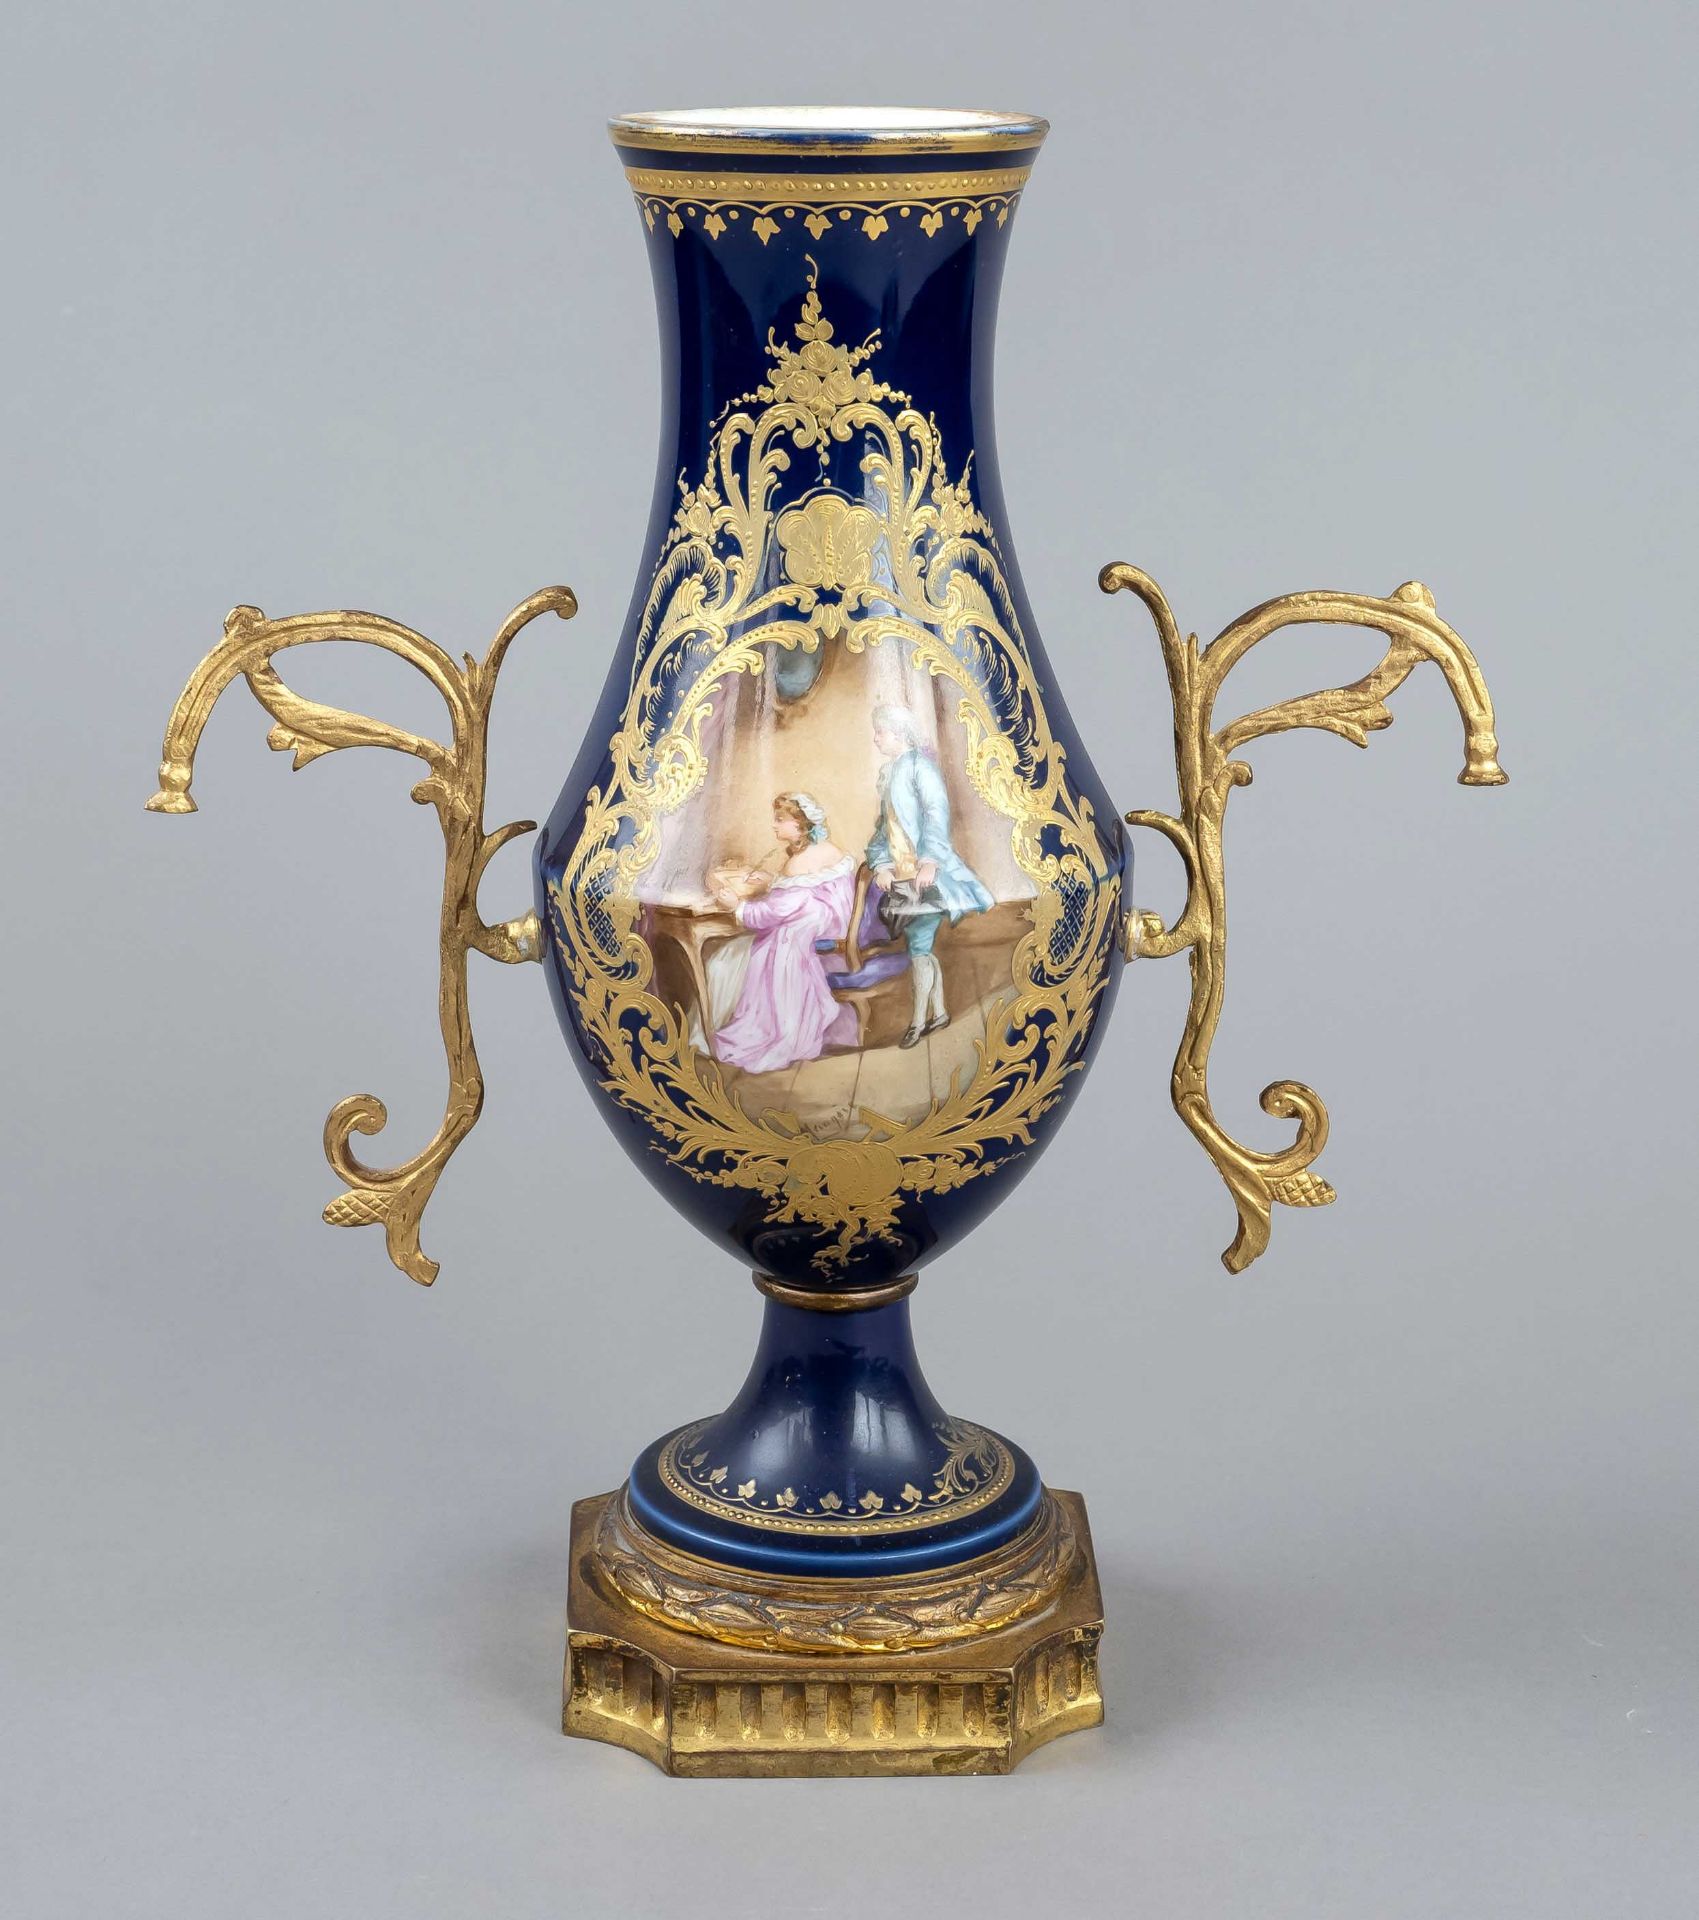 Vase, France, late 19th century, Sevres imitation mark, pear-shaped body on round foot, metal